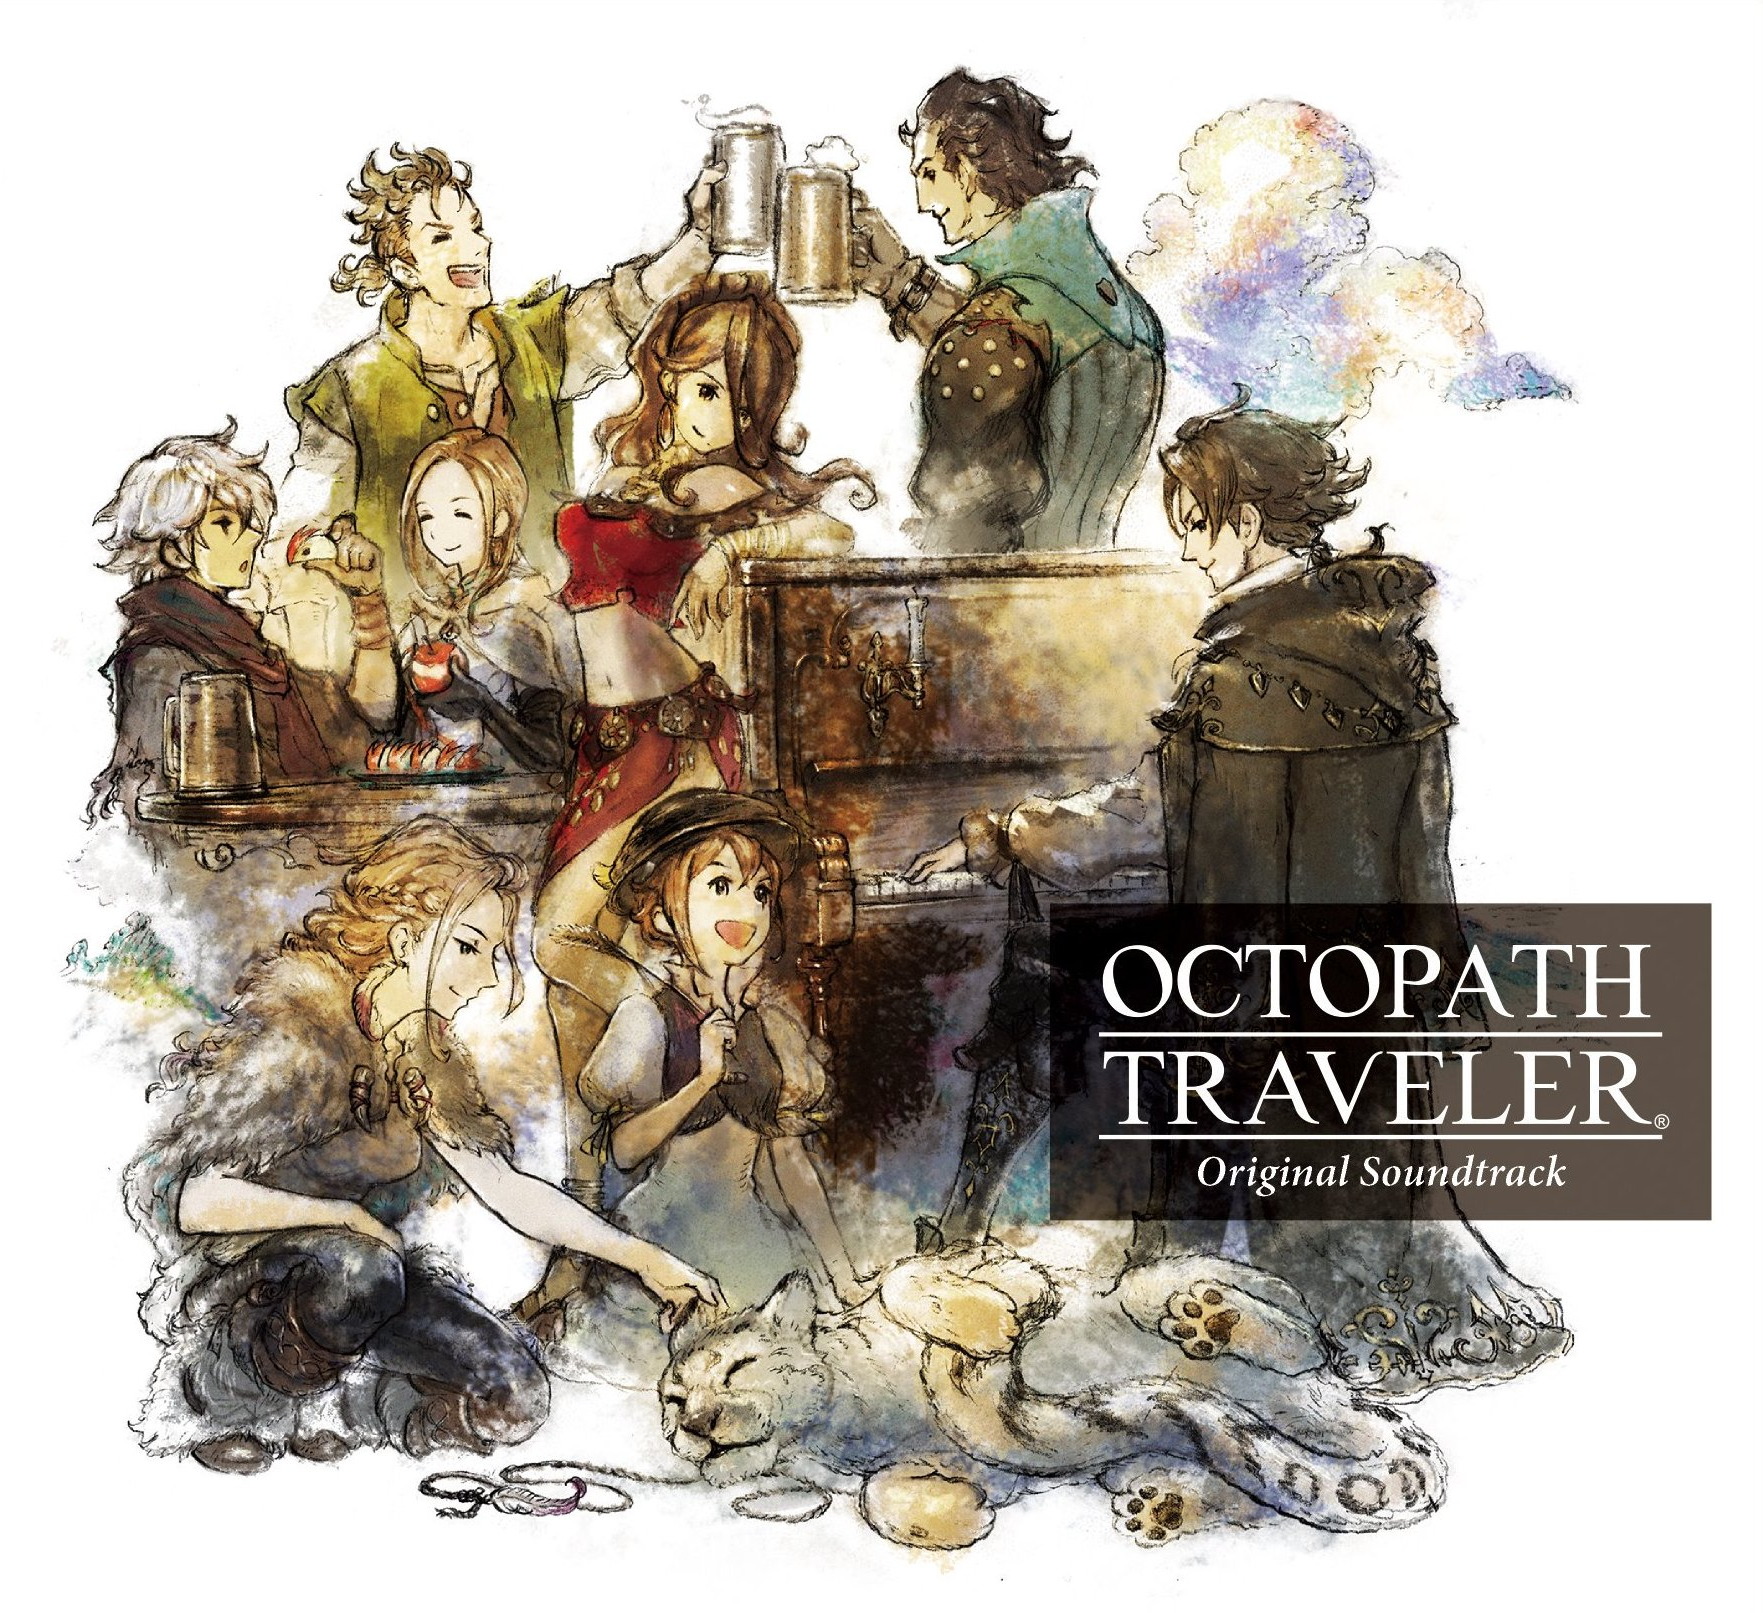 metacritic on X: Octopath Traveler (Switch) reviews go up